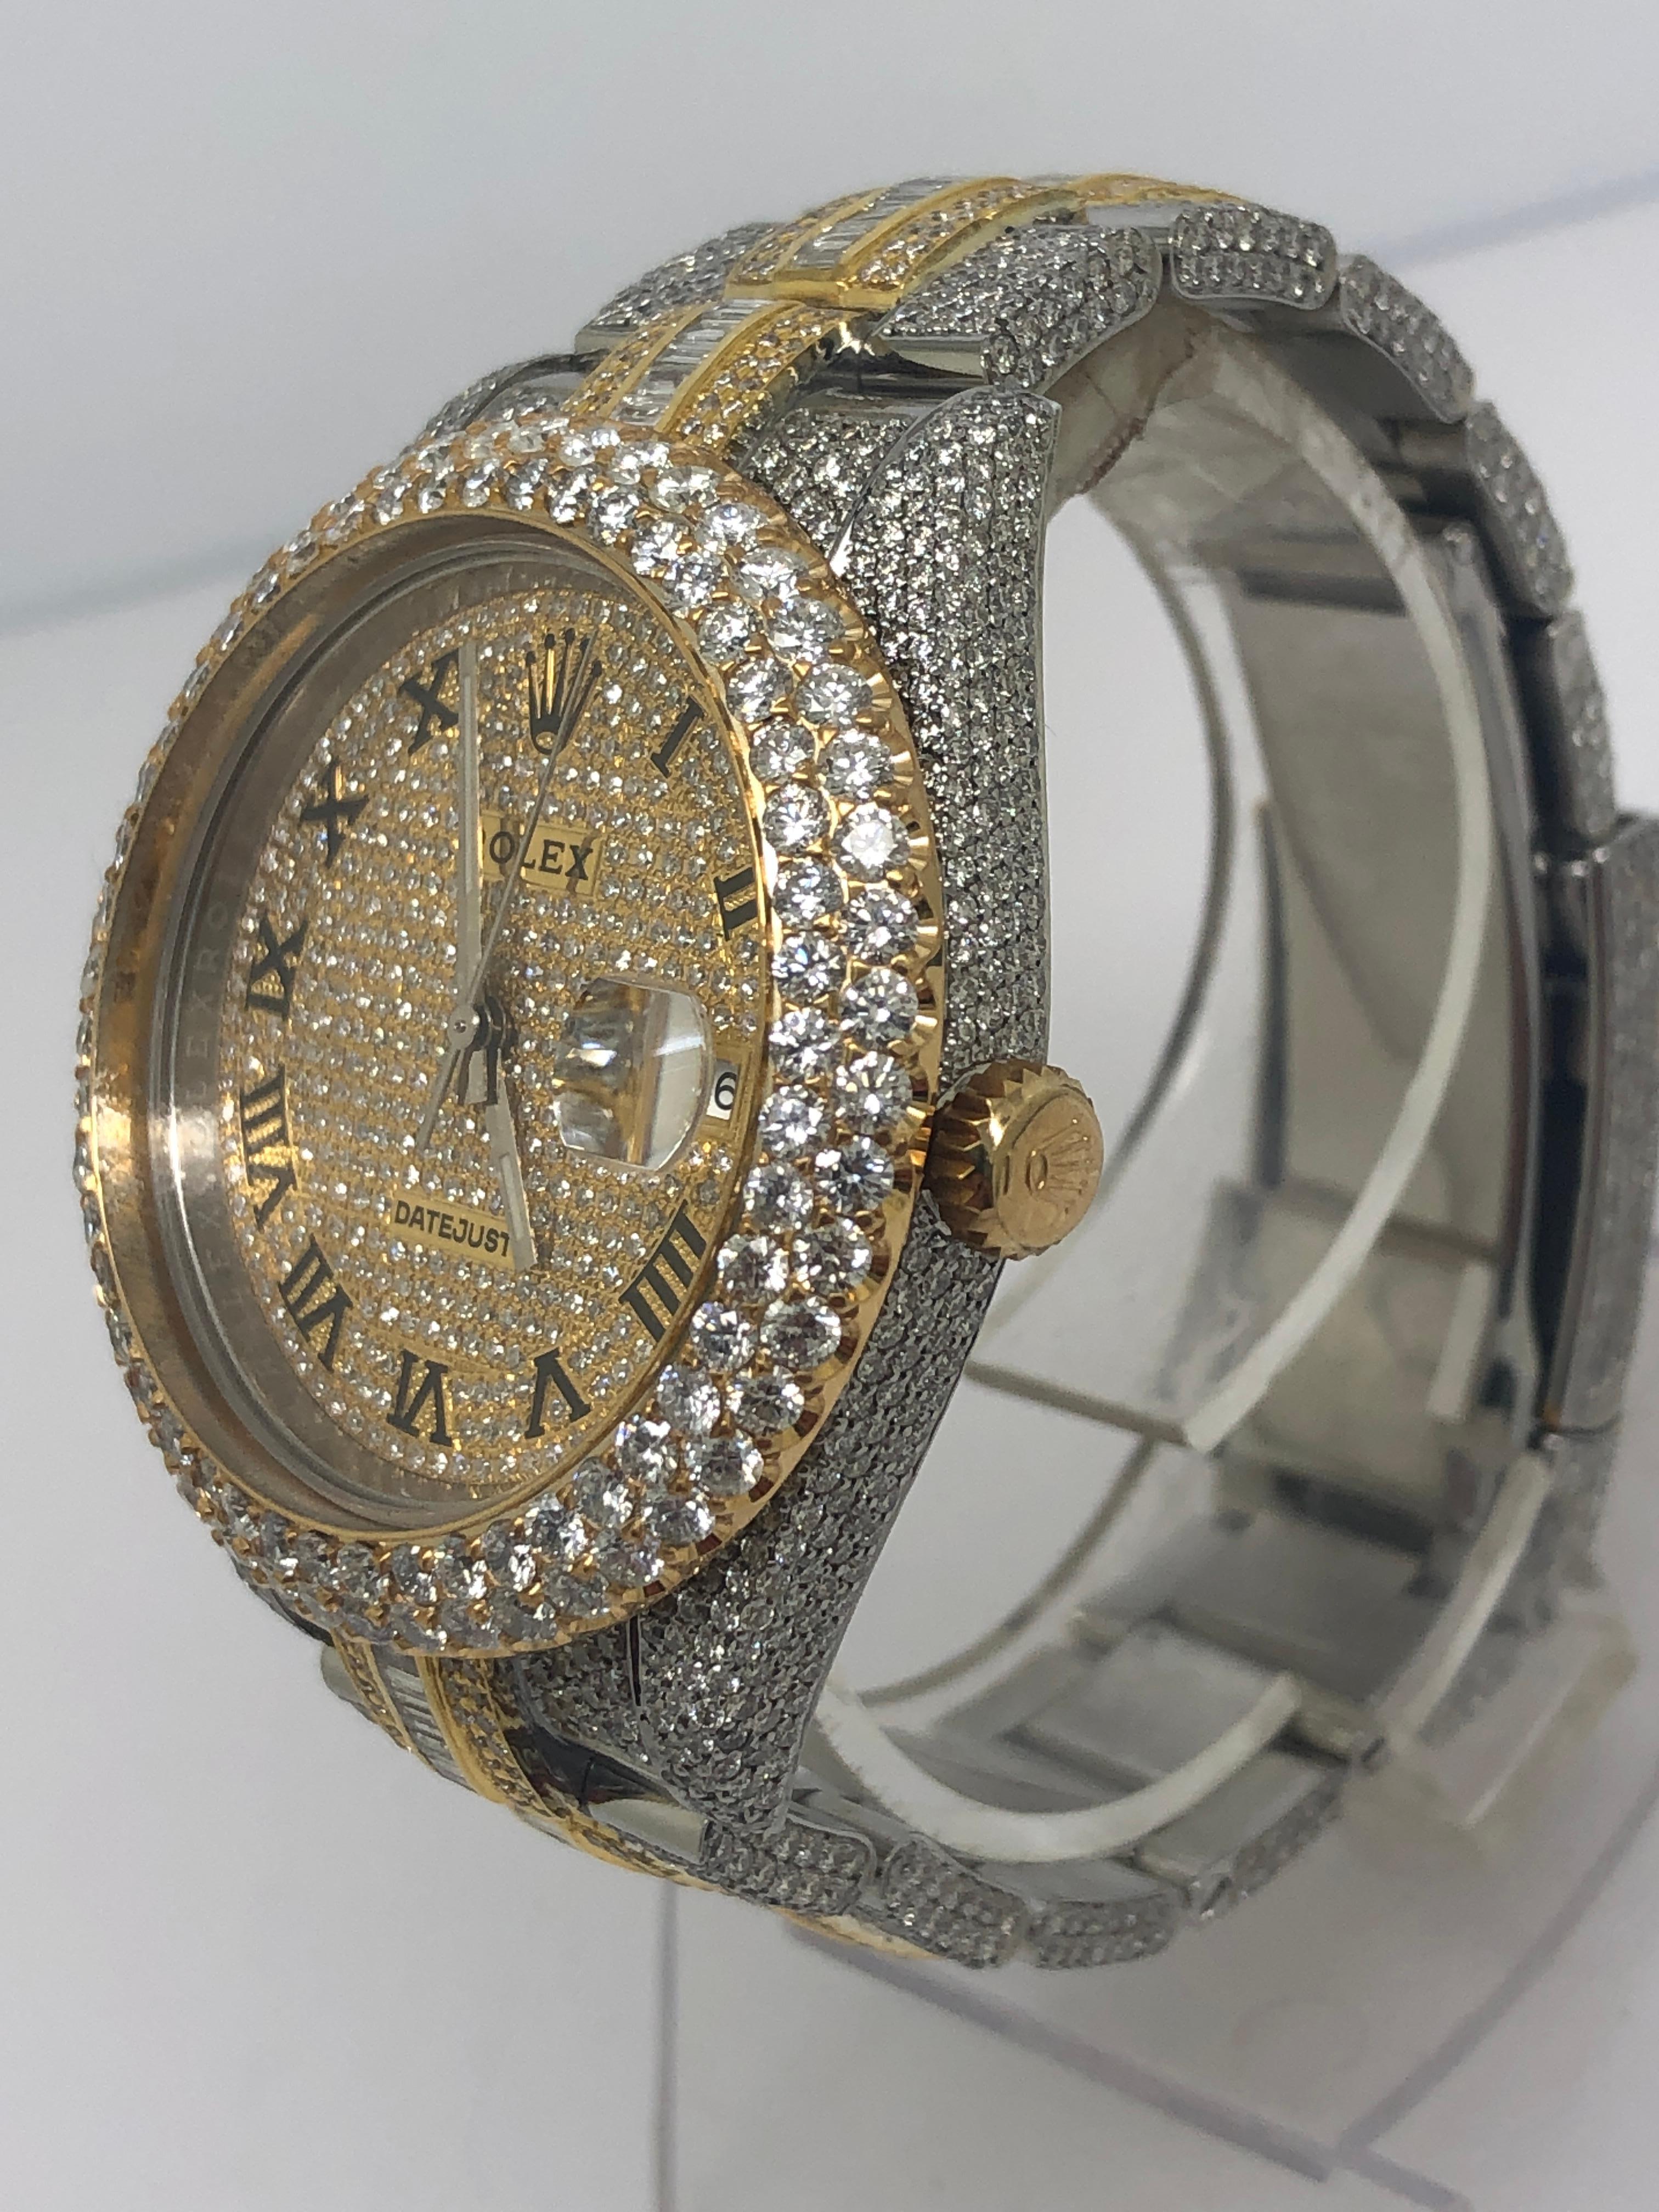 Custom Iced Out Emerald Cut Diamonds Rolex Datejust Wrist Watch In Excellent Condition For Sale In New York, NY